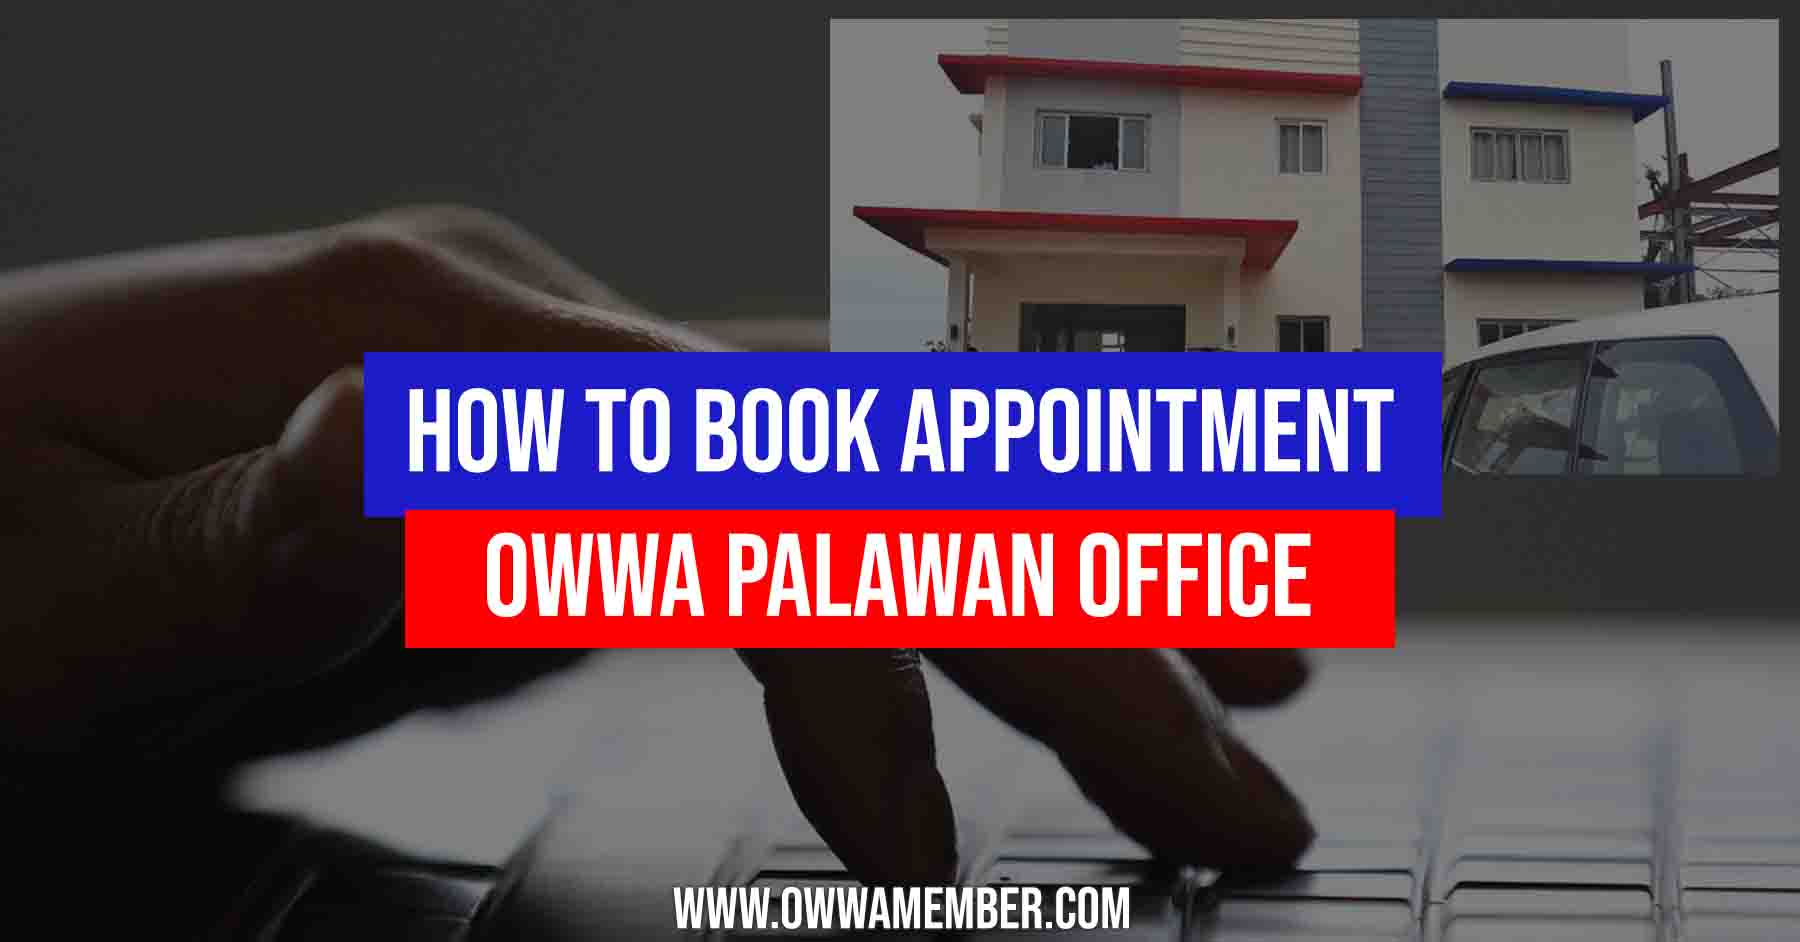 owwa palawan office appointment